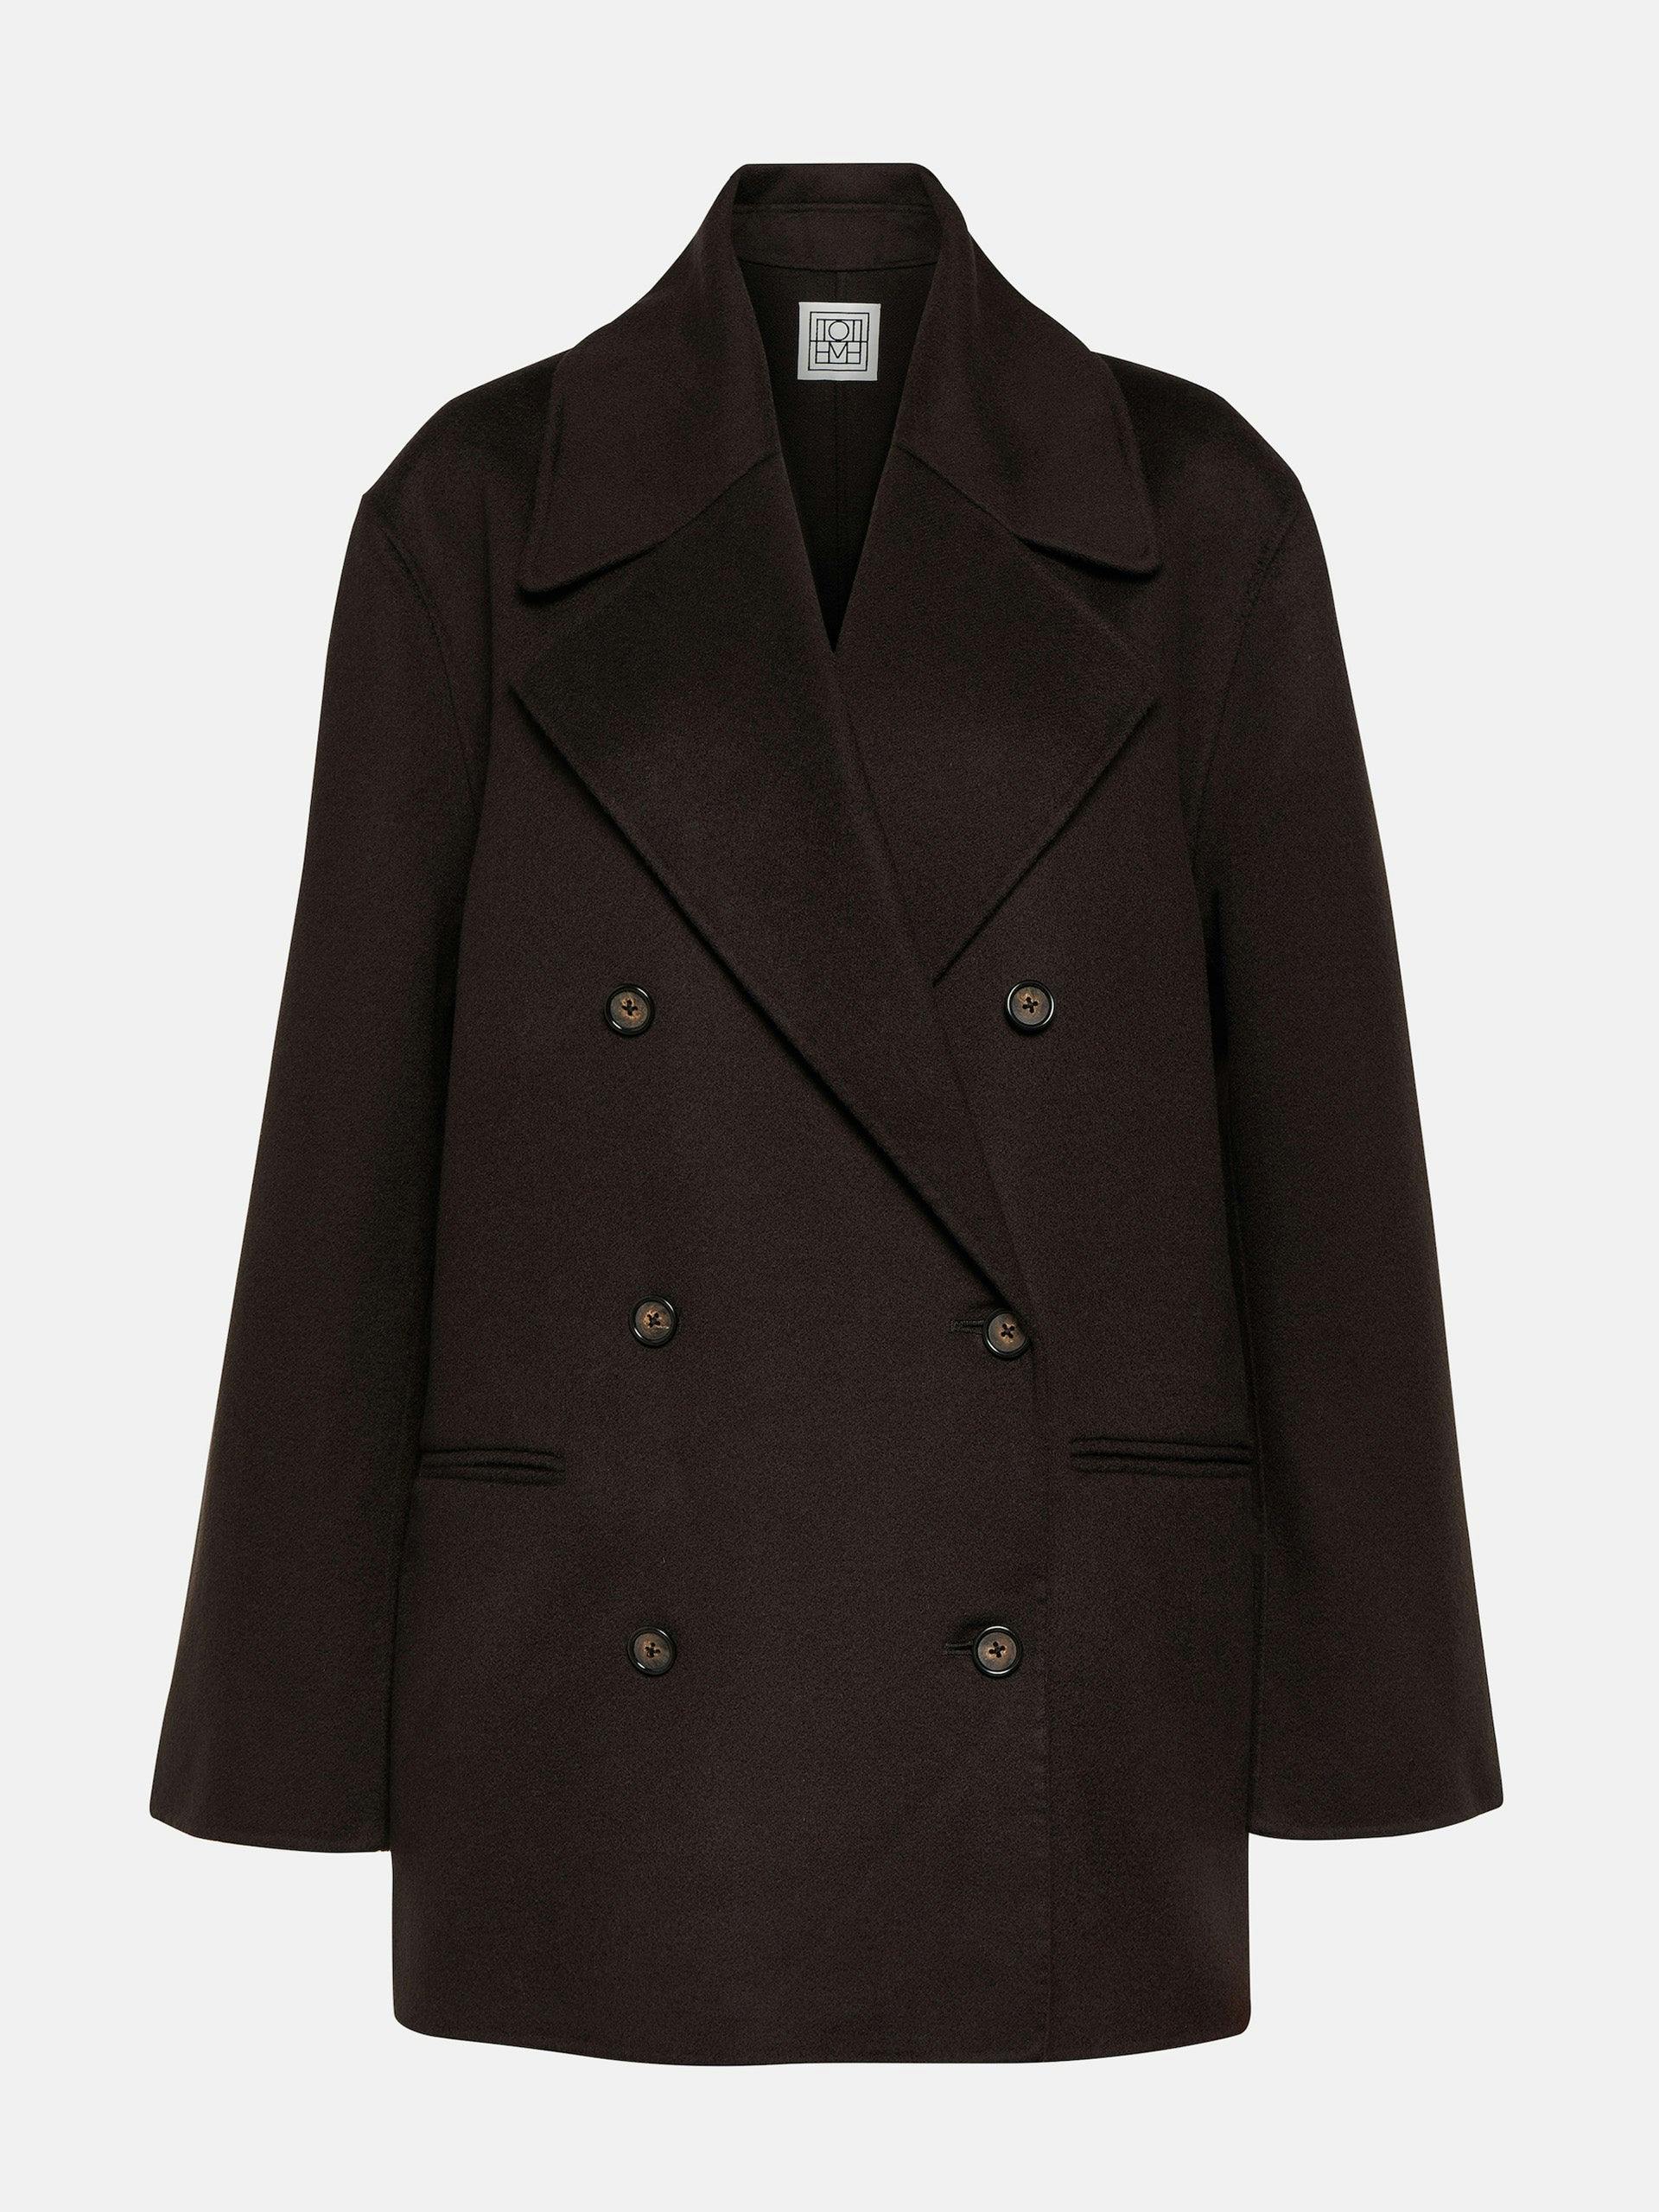 Double-breasted wool peacoat